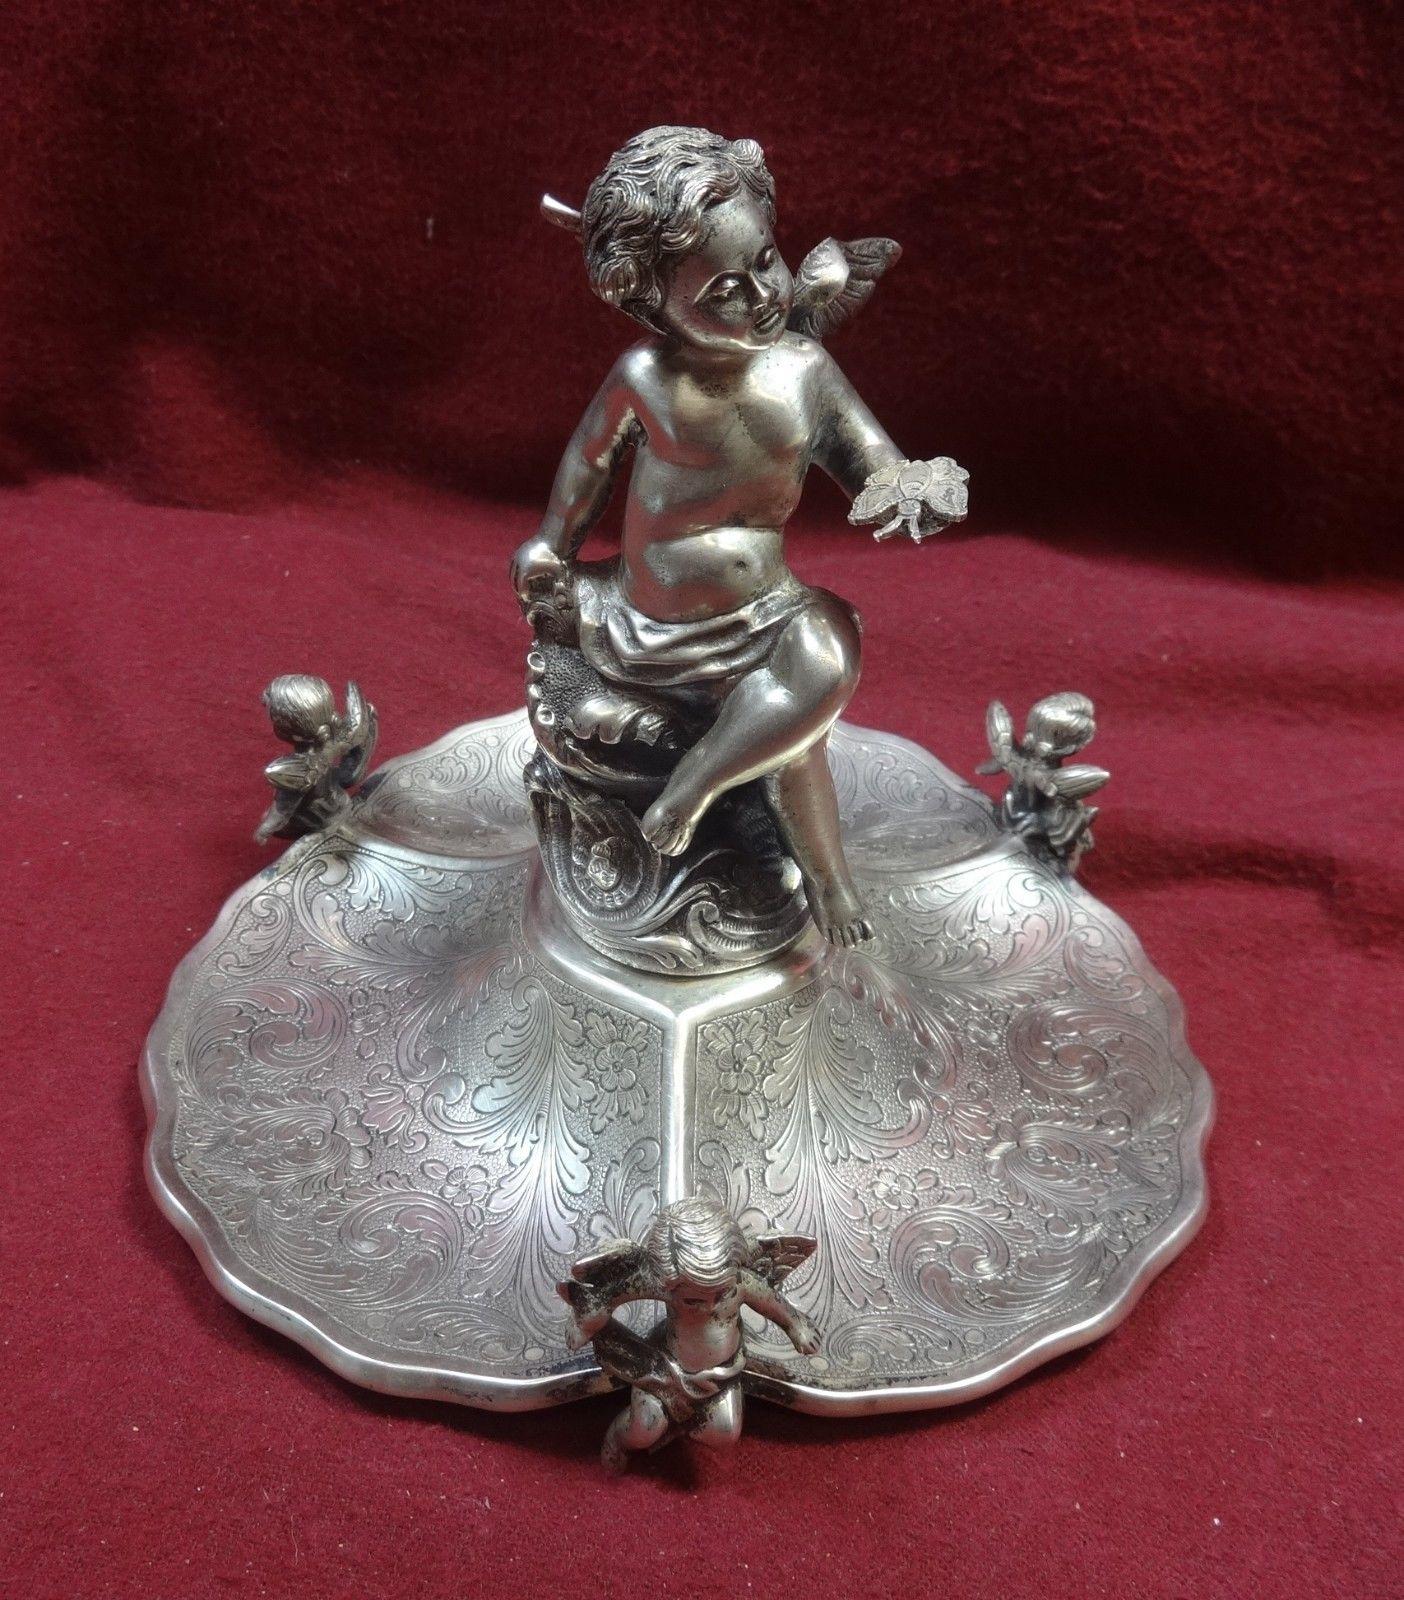 Portuguese sterling silver figural Portuguese Cherub stand with cherub finial and 3 Cherub feet 5 X 6. Weight is 18.10 troy ounces. It is not monogrammed and is in excellent condition. 

 